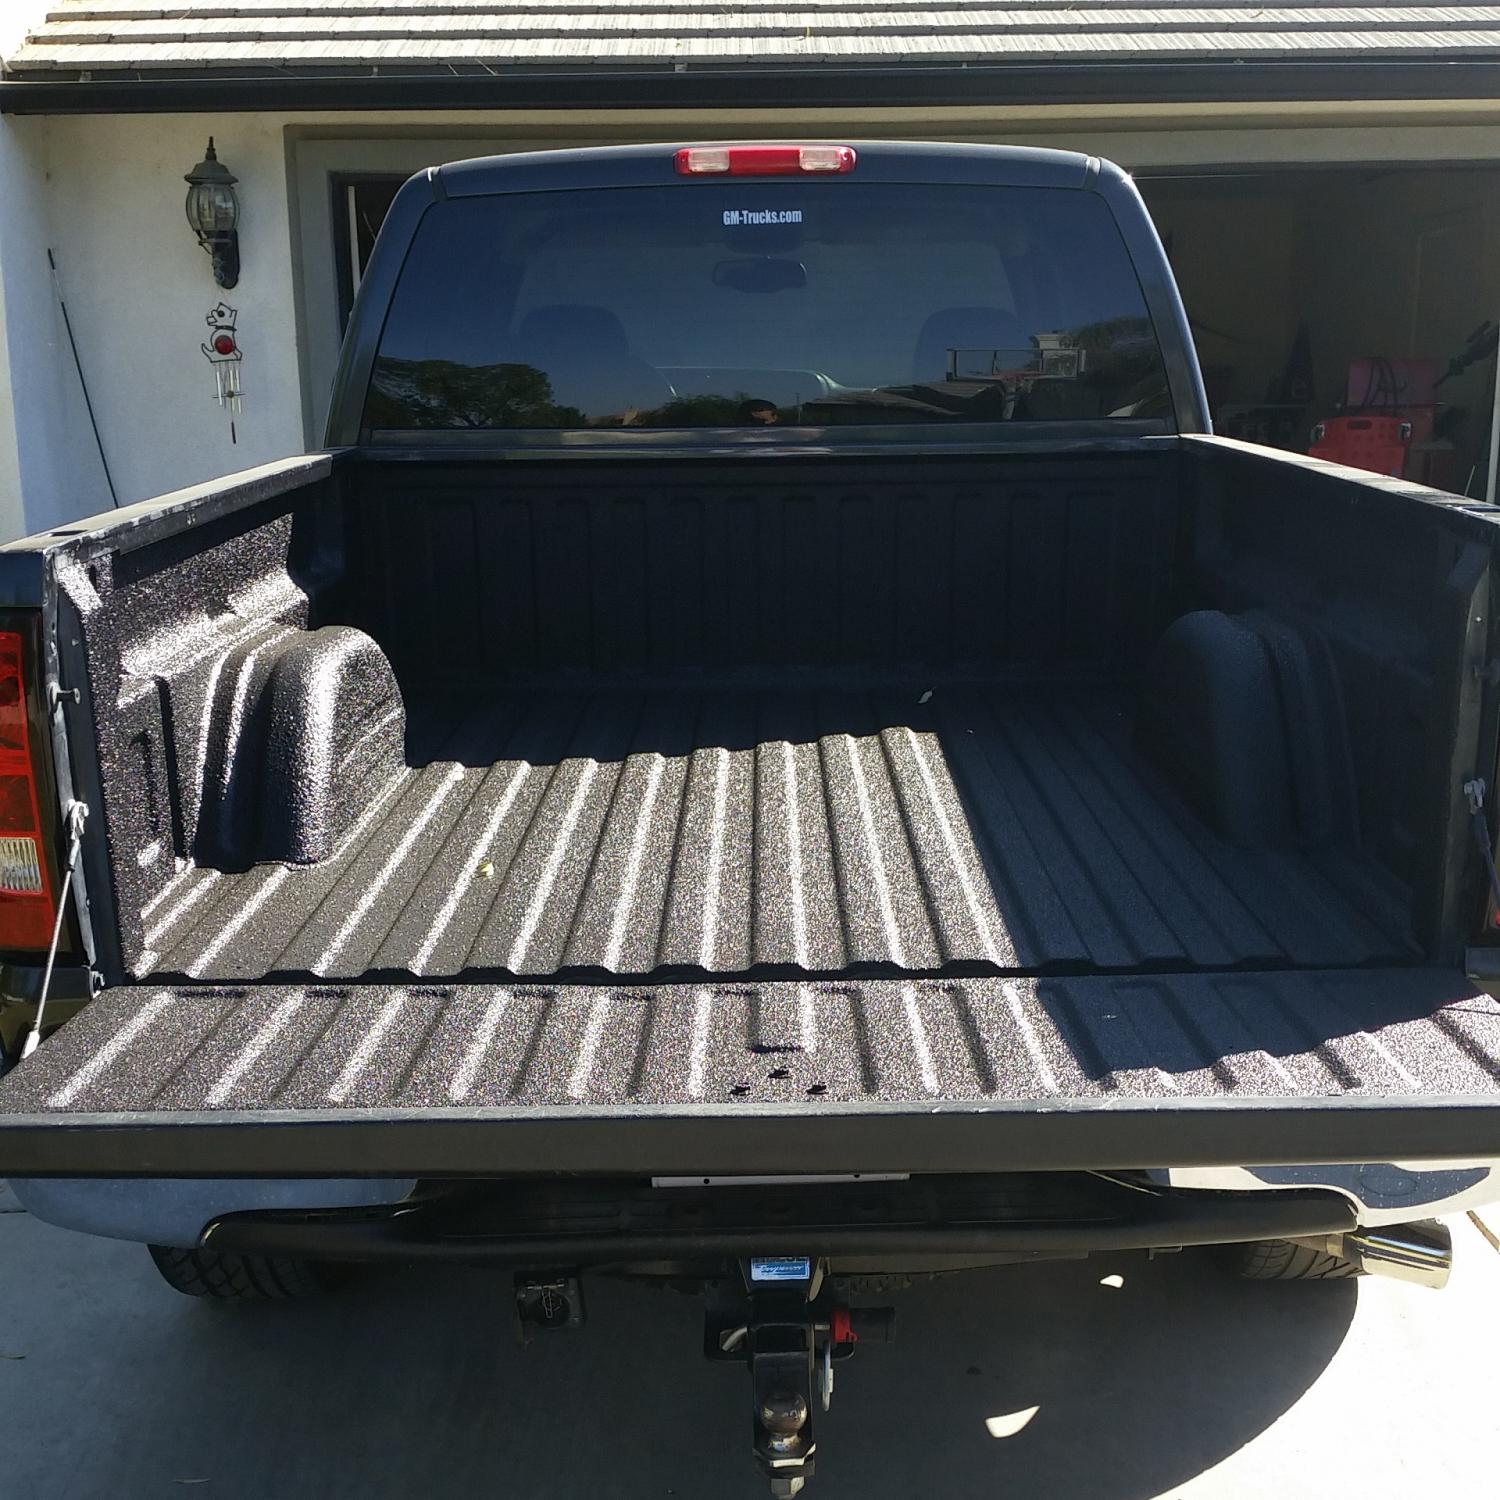 Product Test - Scorpion Coating Bed Liner